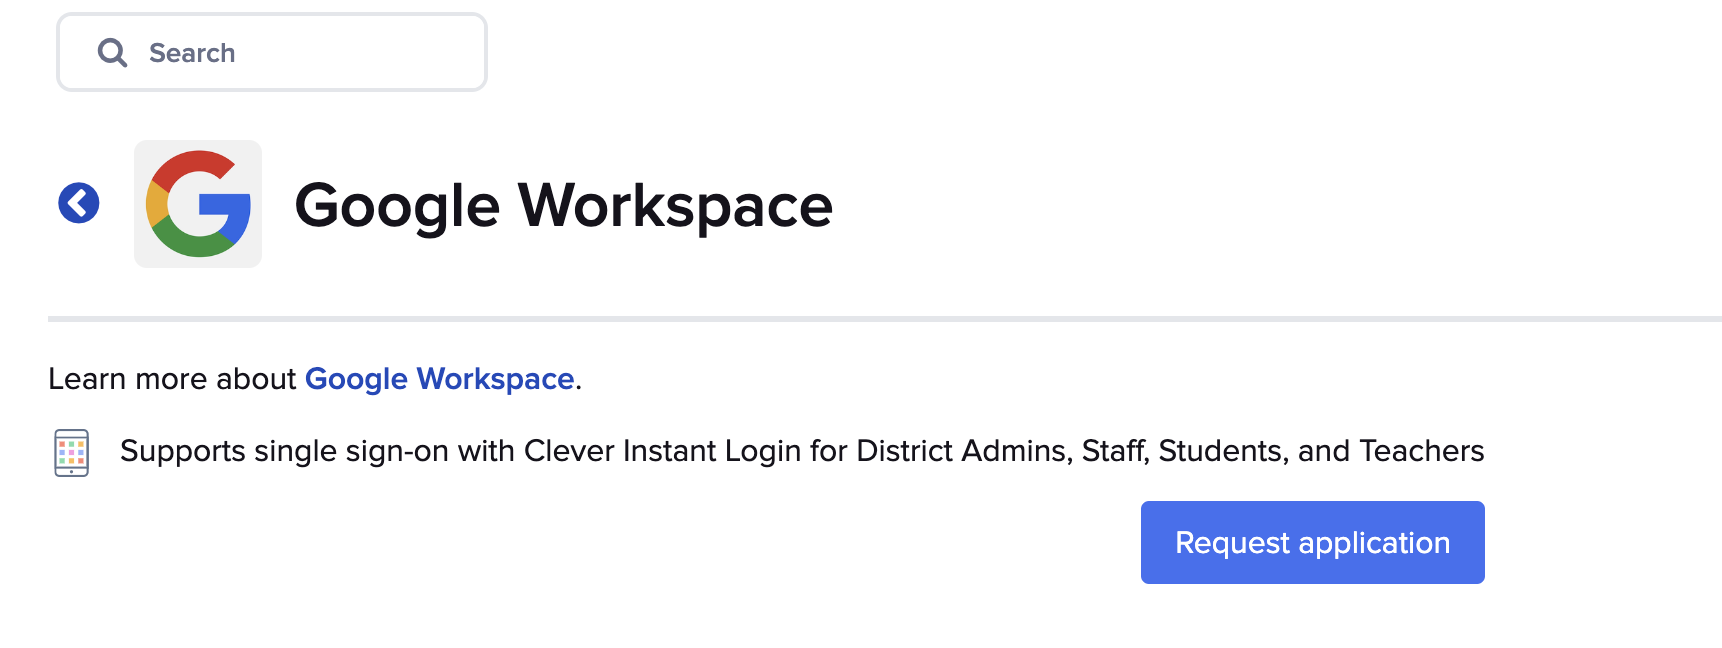 too many requests error when signing up for workspace - Google